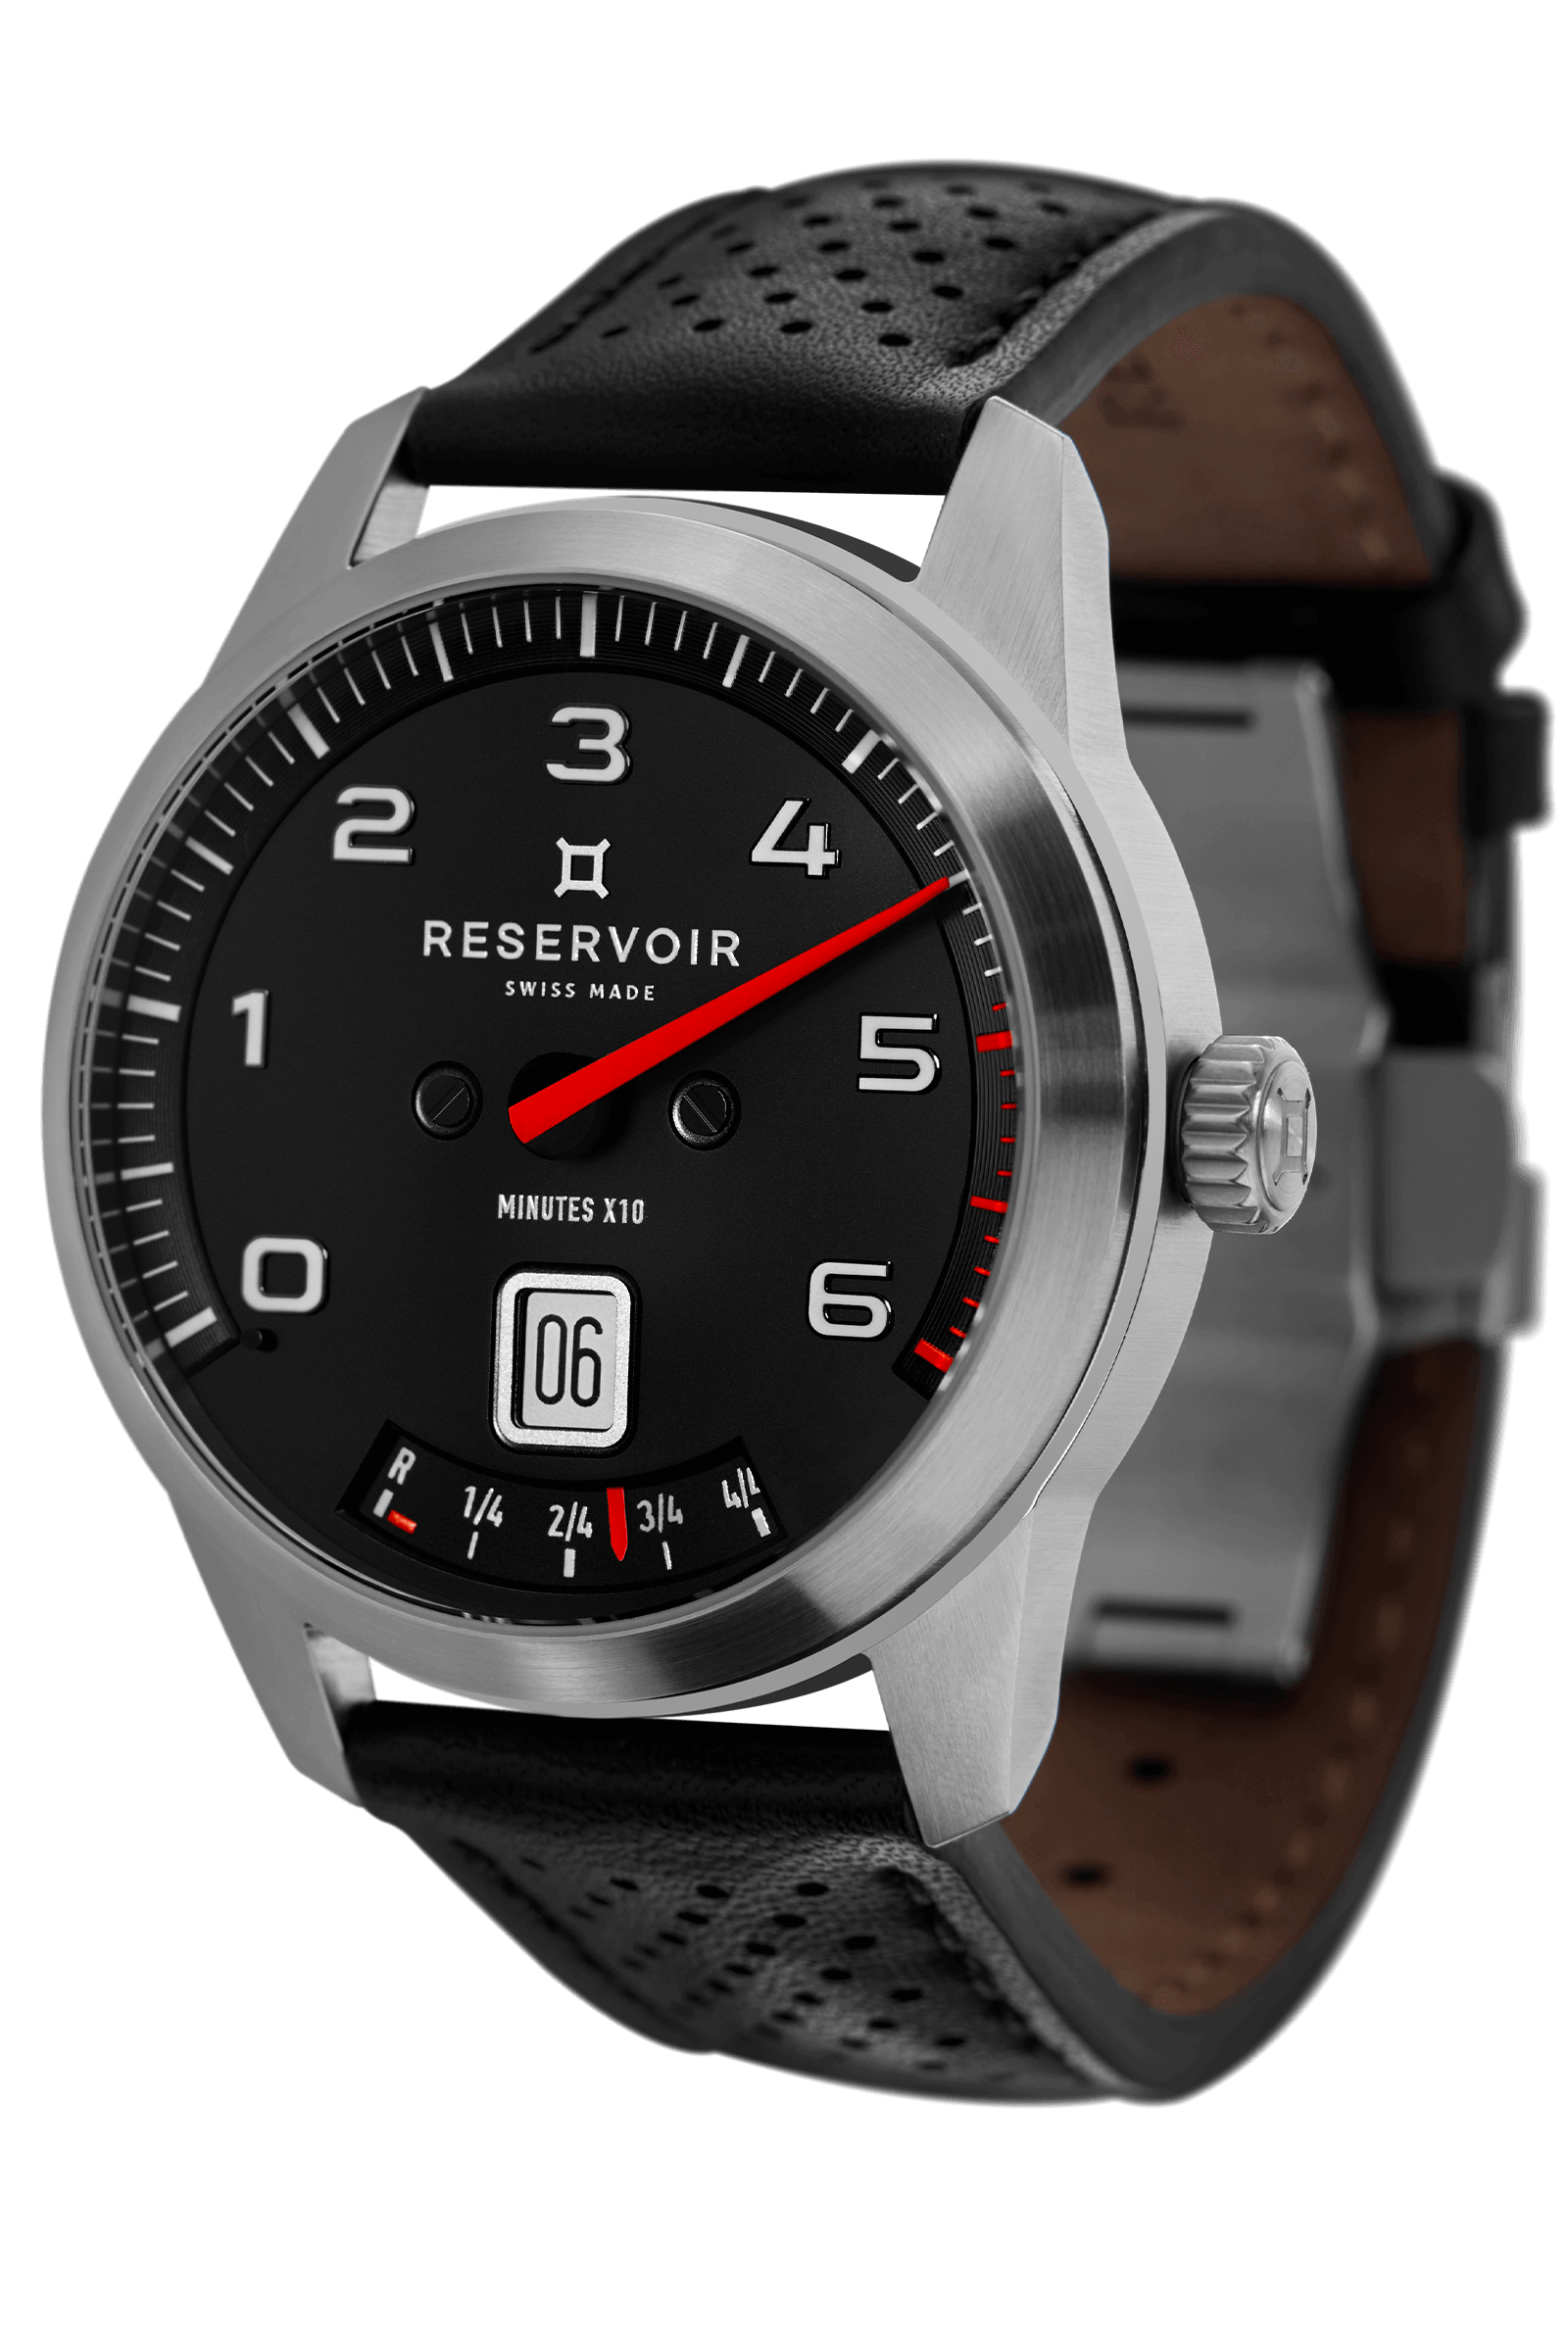 Dark charcoal GT racing car with light and medium grey speedometer and leather strap.